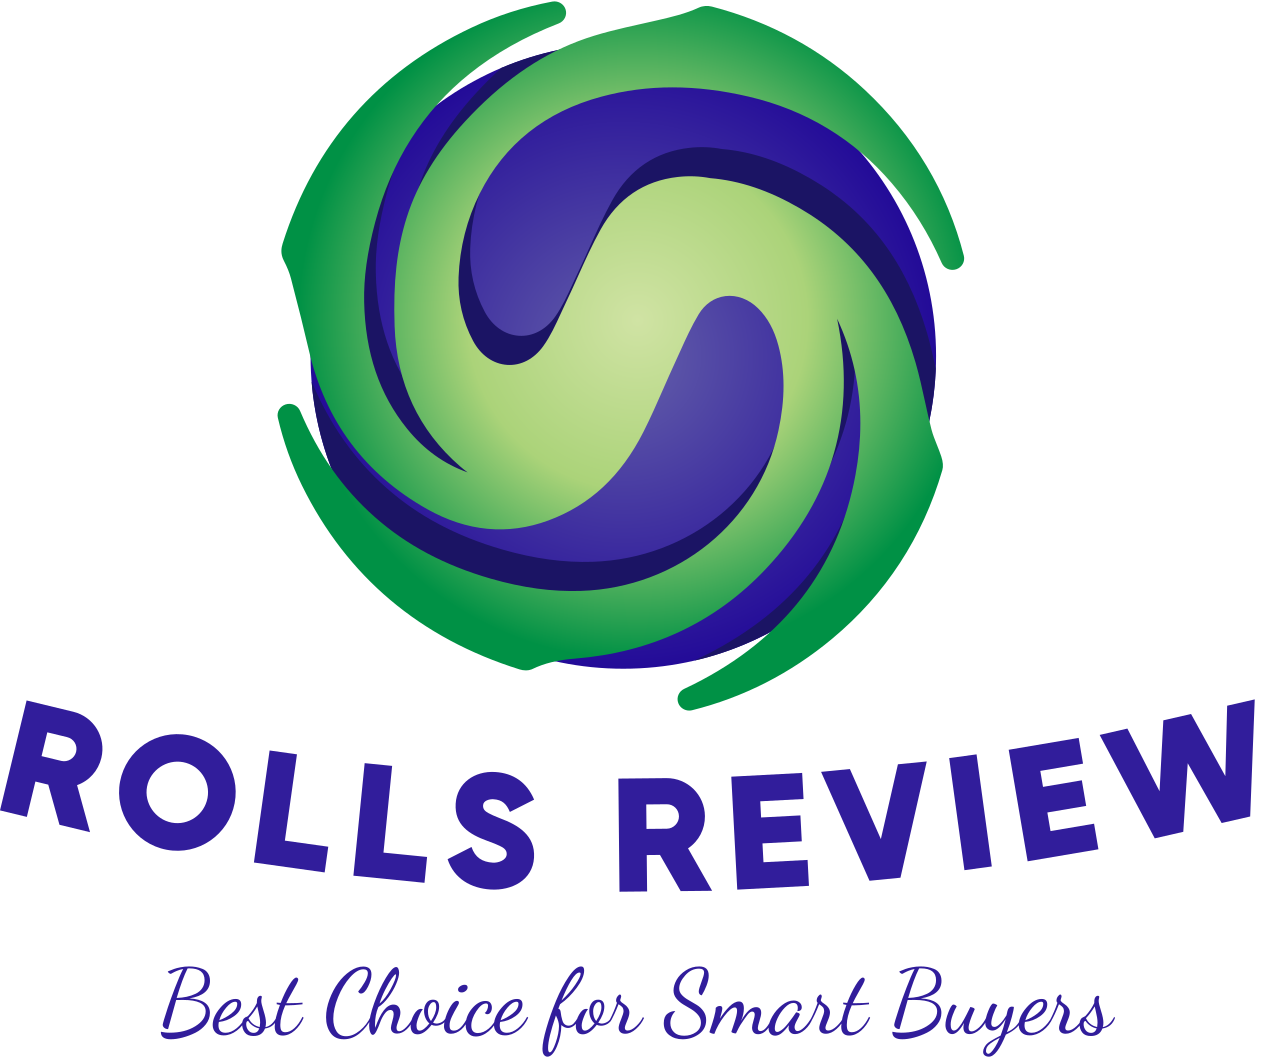 Rolls Review's web page